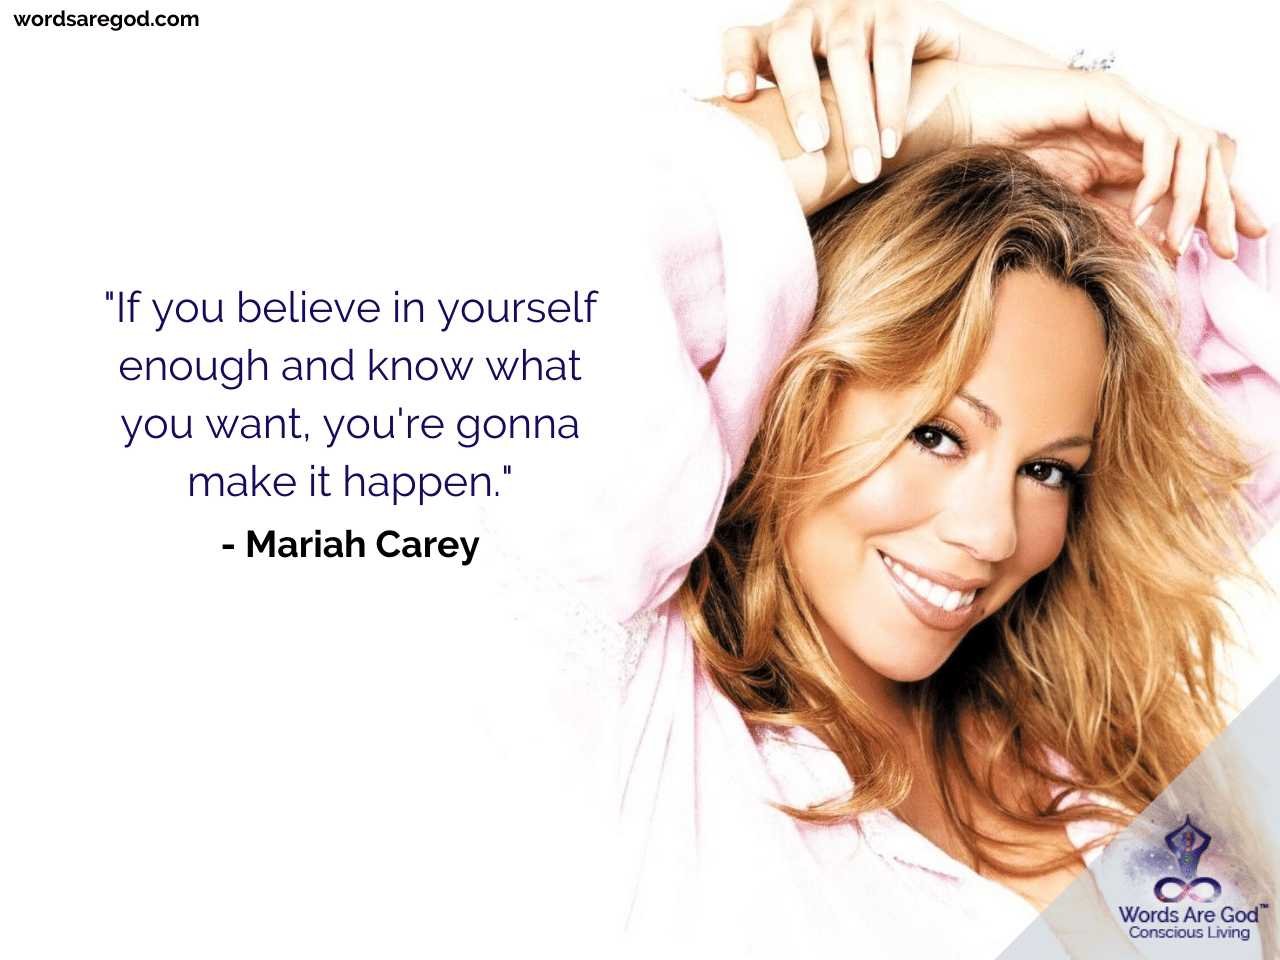 Simple Mariah Carey Quotes Images & Photos - Wish Me On